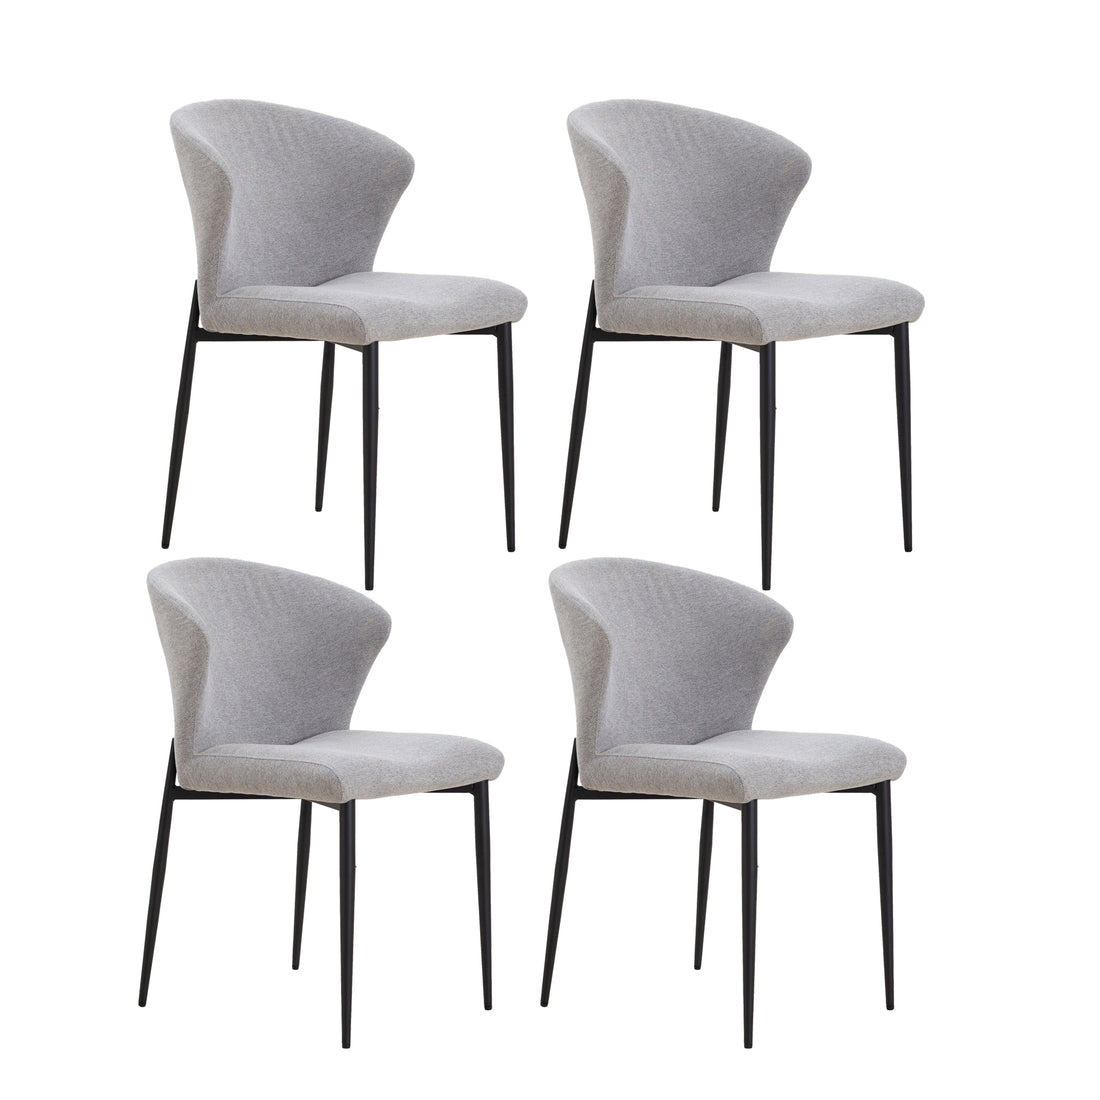 Dining Chairs Set Of 4, Upholstered Side Chairs -